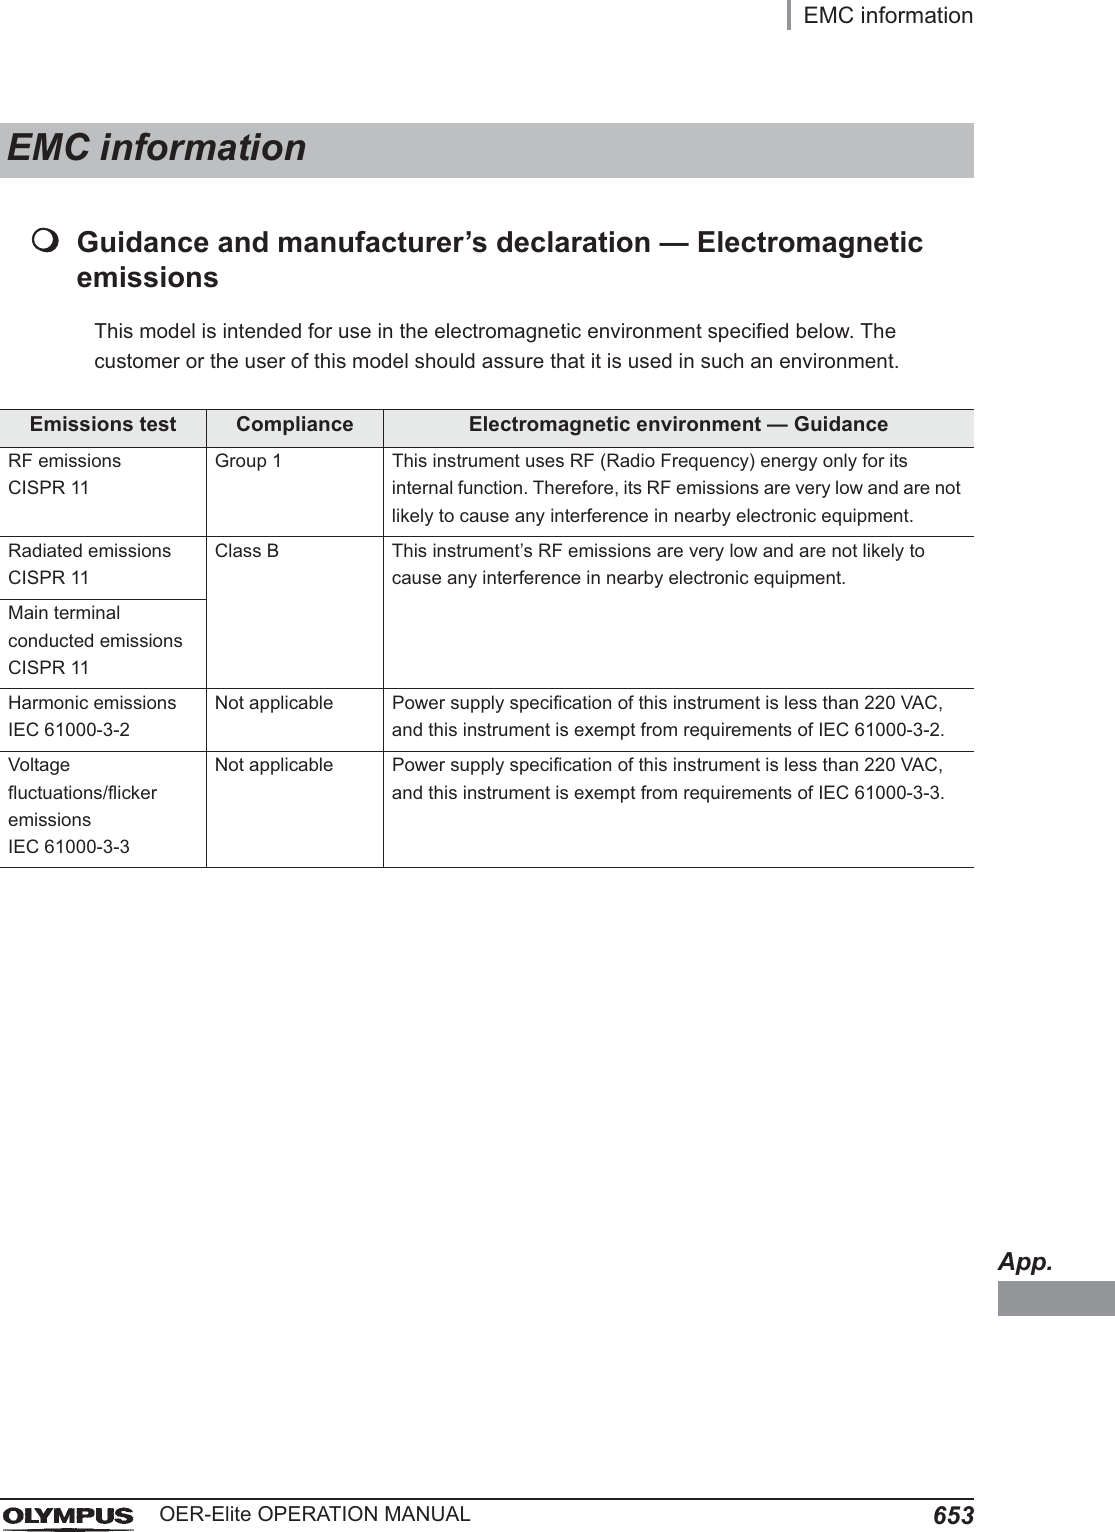 App.EMC information653OER-Elite OPERATION MANUALGuidance and manufacturer’s declaration — Electromagnetic emissionsThis model is intended for use in the electromagnetic environment specified below. The customer or the user of this model should assure that it is used in such an environment.EMC informationEmissions test Compliance Electromagnetic environment — GuidanceRF emissionsCISPR 11Group 1 This instrument uses RF (Radio Frequency) energy only for its internal function. Therefore, its RF emissions are very low and are not likely to cause any interference in nearby electronic equipment.Radiated emissionsCISPR 11Class B This instrument’s RF emissions are very low and are not likely to cause any interference in nearby electronic equipment.Main terminal conducted emissionsCISPR 11Harmonic emissionsIEC 61000-3-2Not applicable Power supply specification of this instrument is less than 220 VAC, and this instrument is exempt from requirements of IEC 61000-3-2.Voltage fluctuations/flicker emissionsIEC 61000-3-3Not applicable Power supply specification of this instrument is less than 220 VAC, and this instrument is exempt from requirements of IEC 61000-3-3.